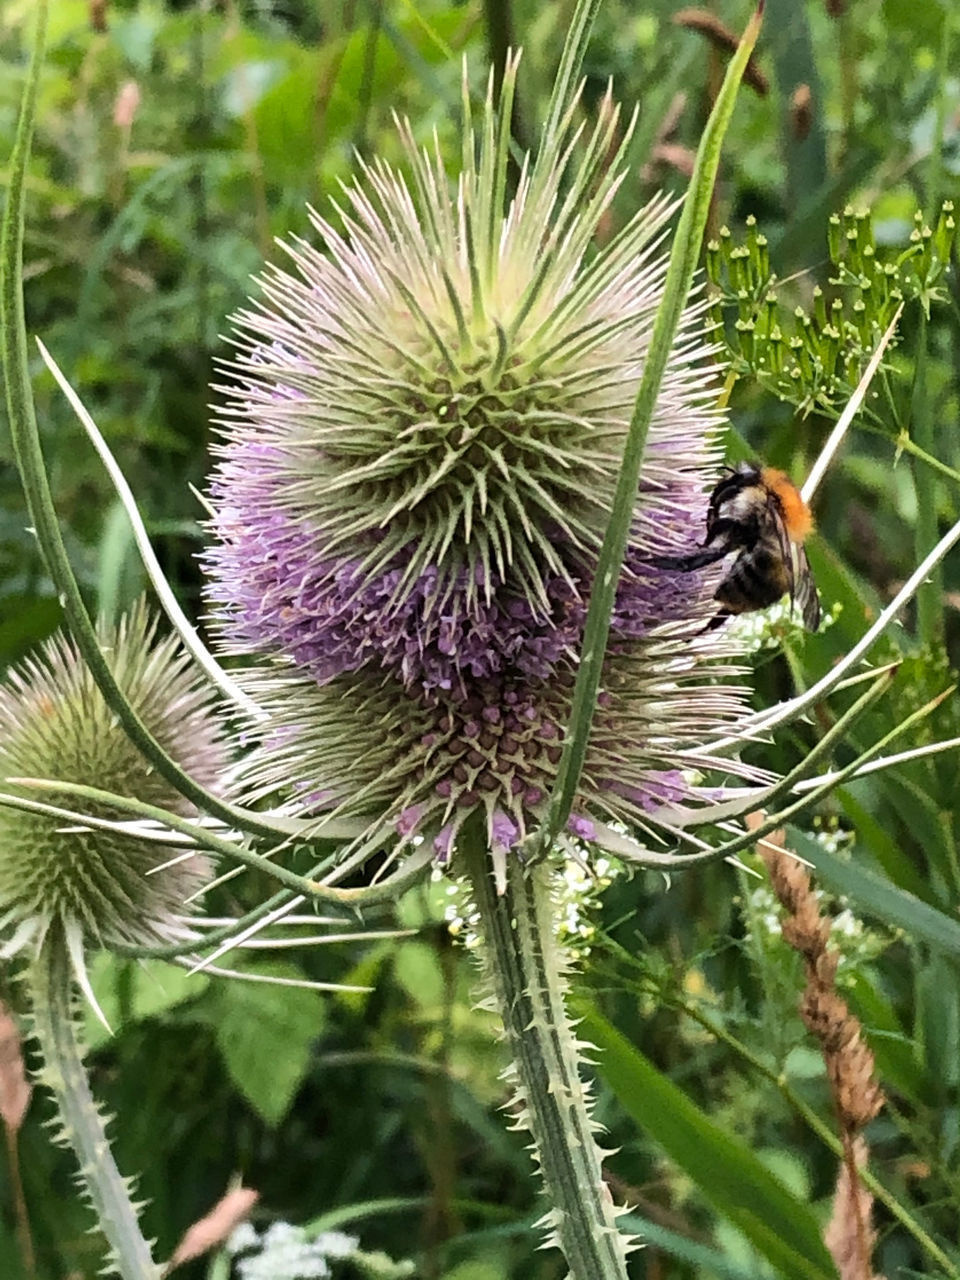 CLOSE-UP OF BUG ON THISTLE FLOWER